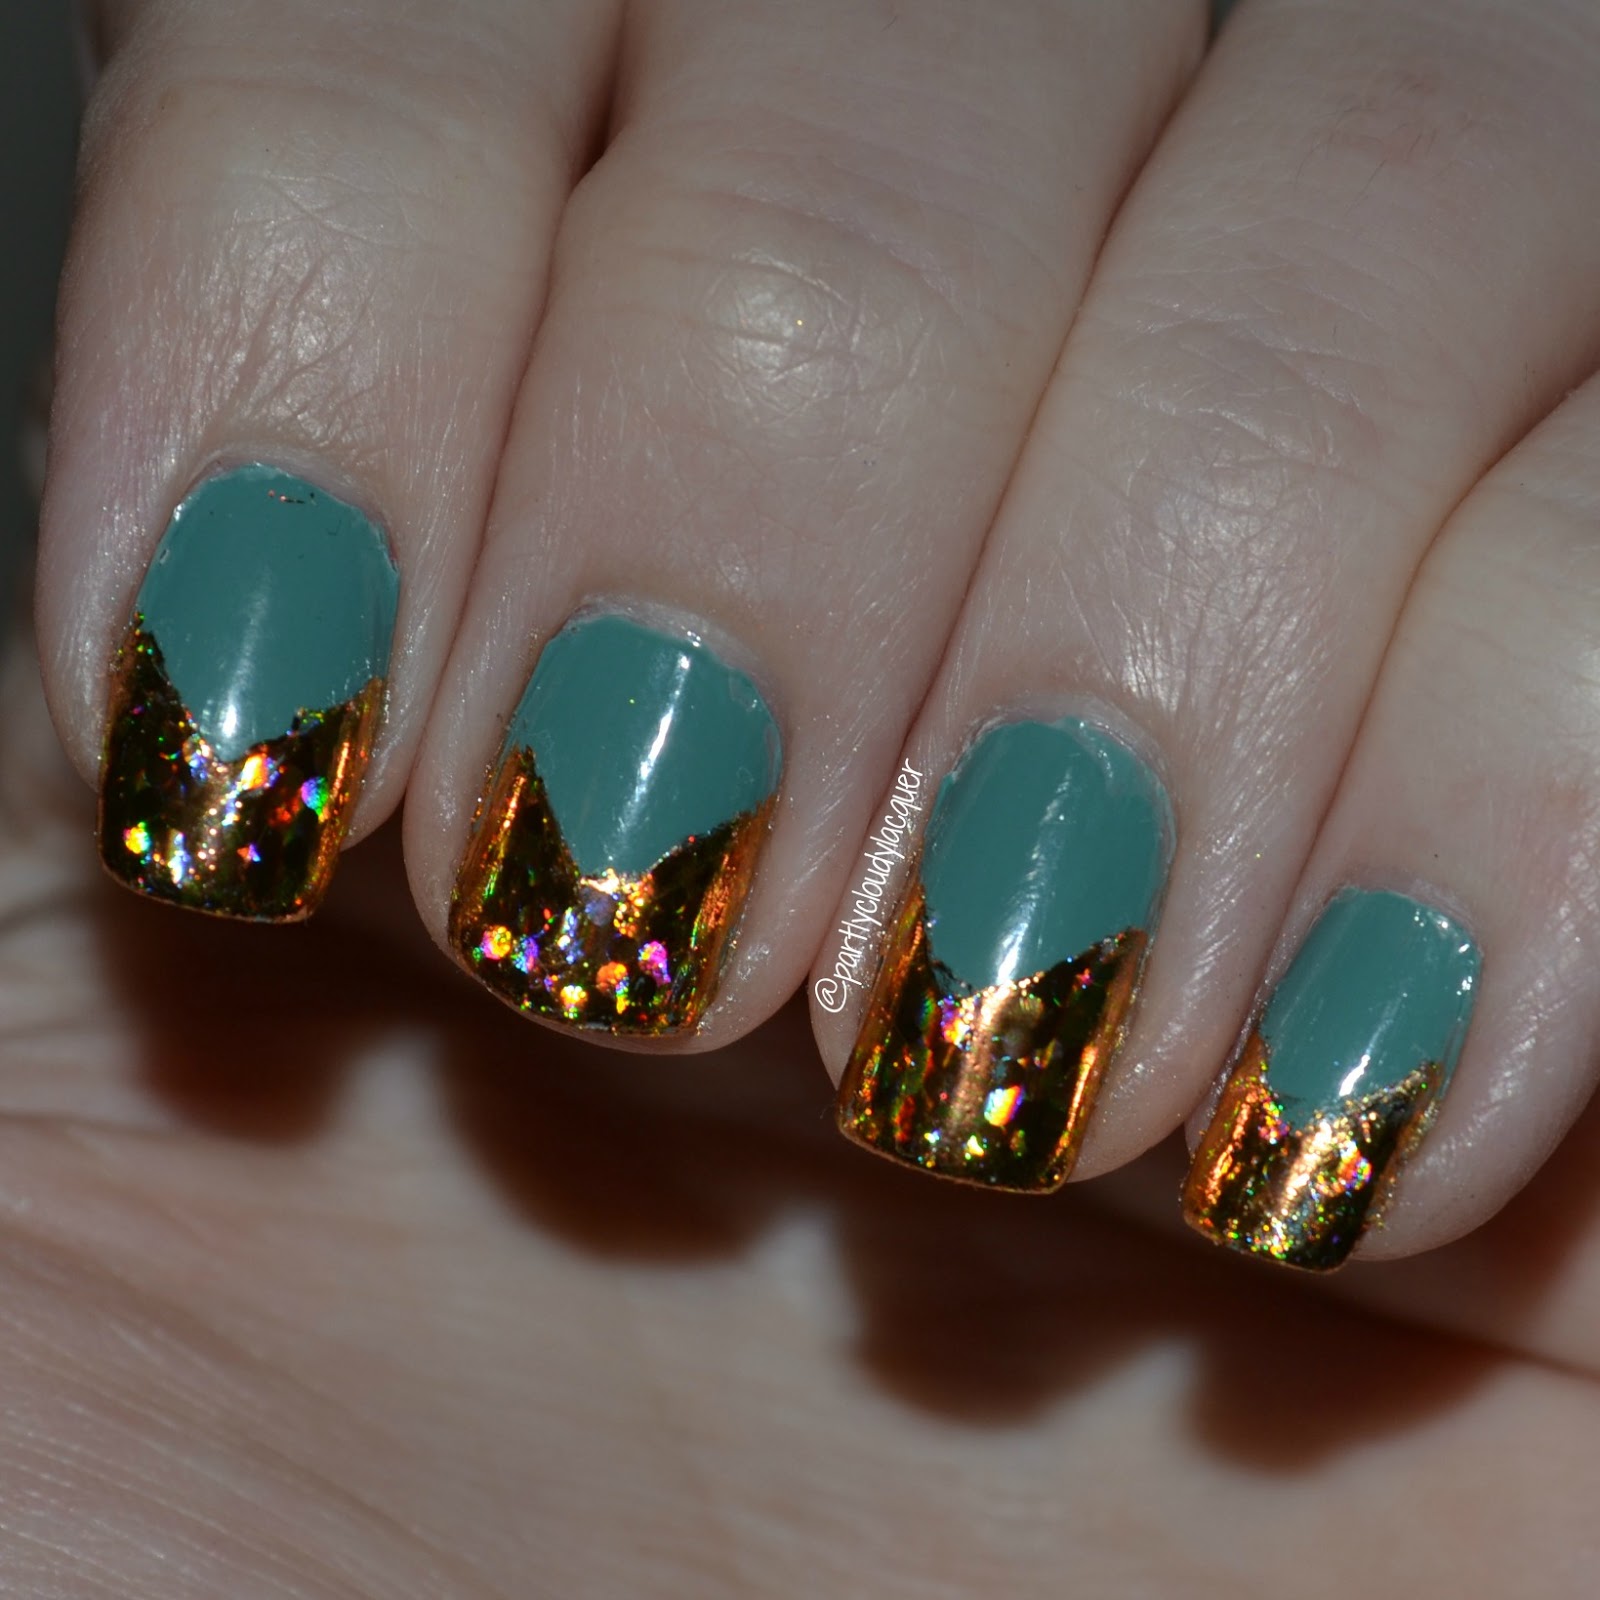 Partly Cloudy With a Chance of Lacquer: French Tip Nails using